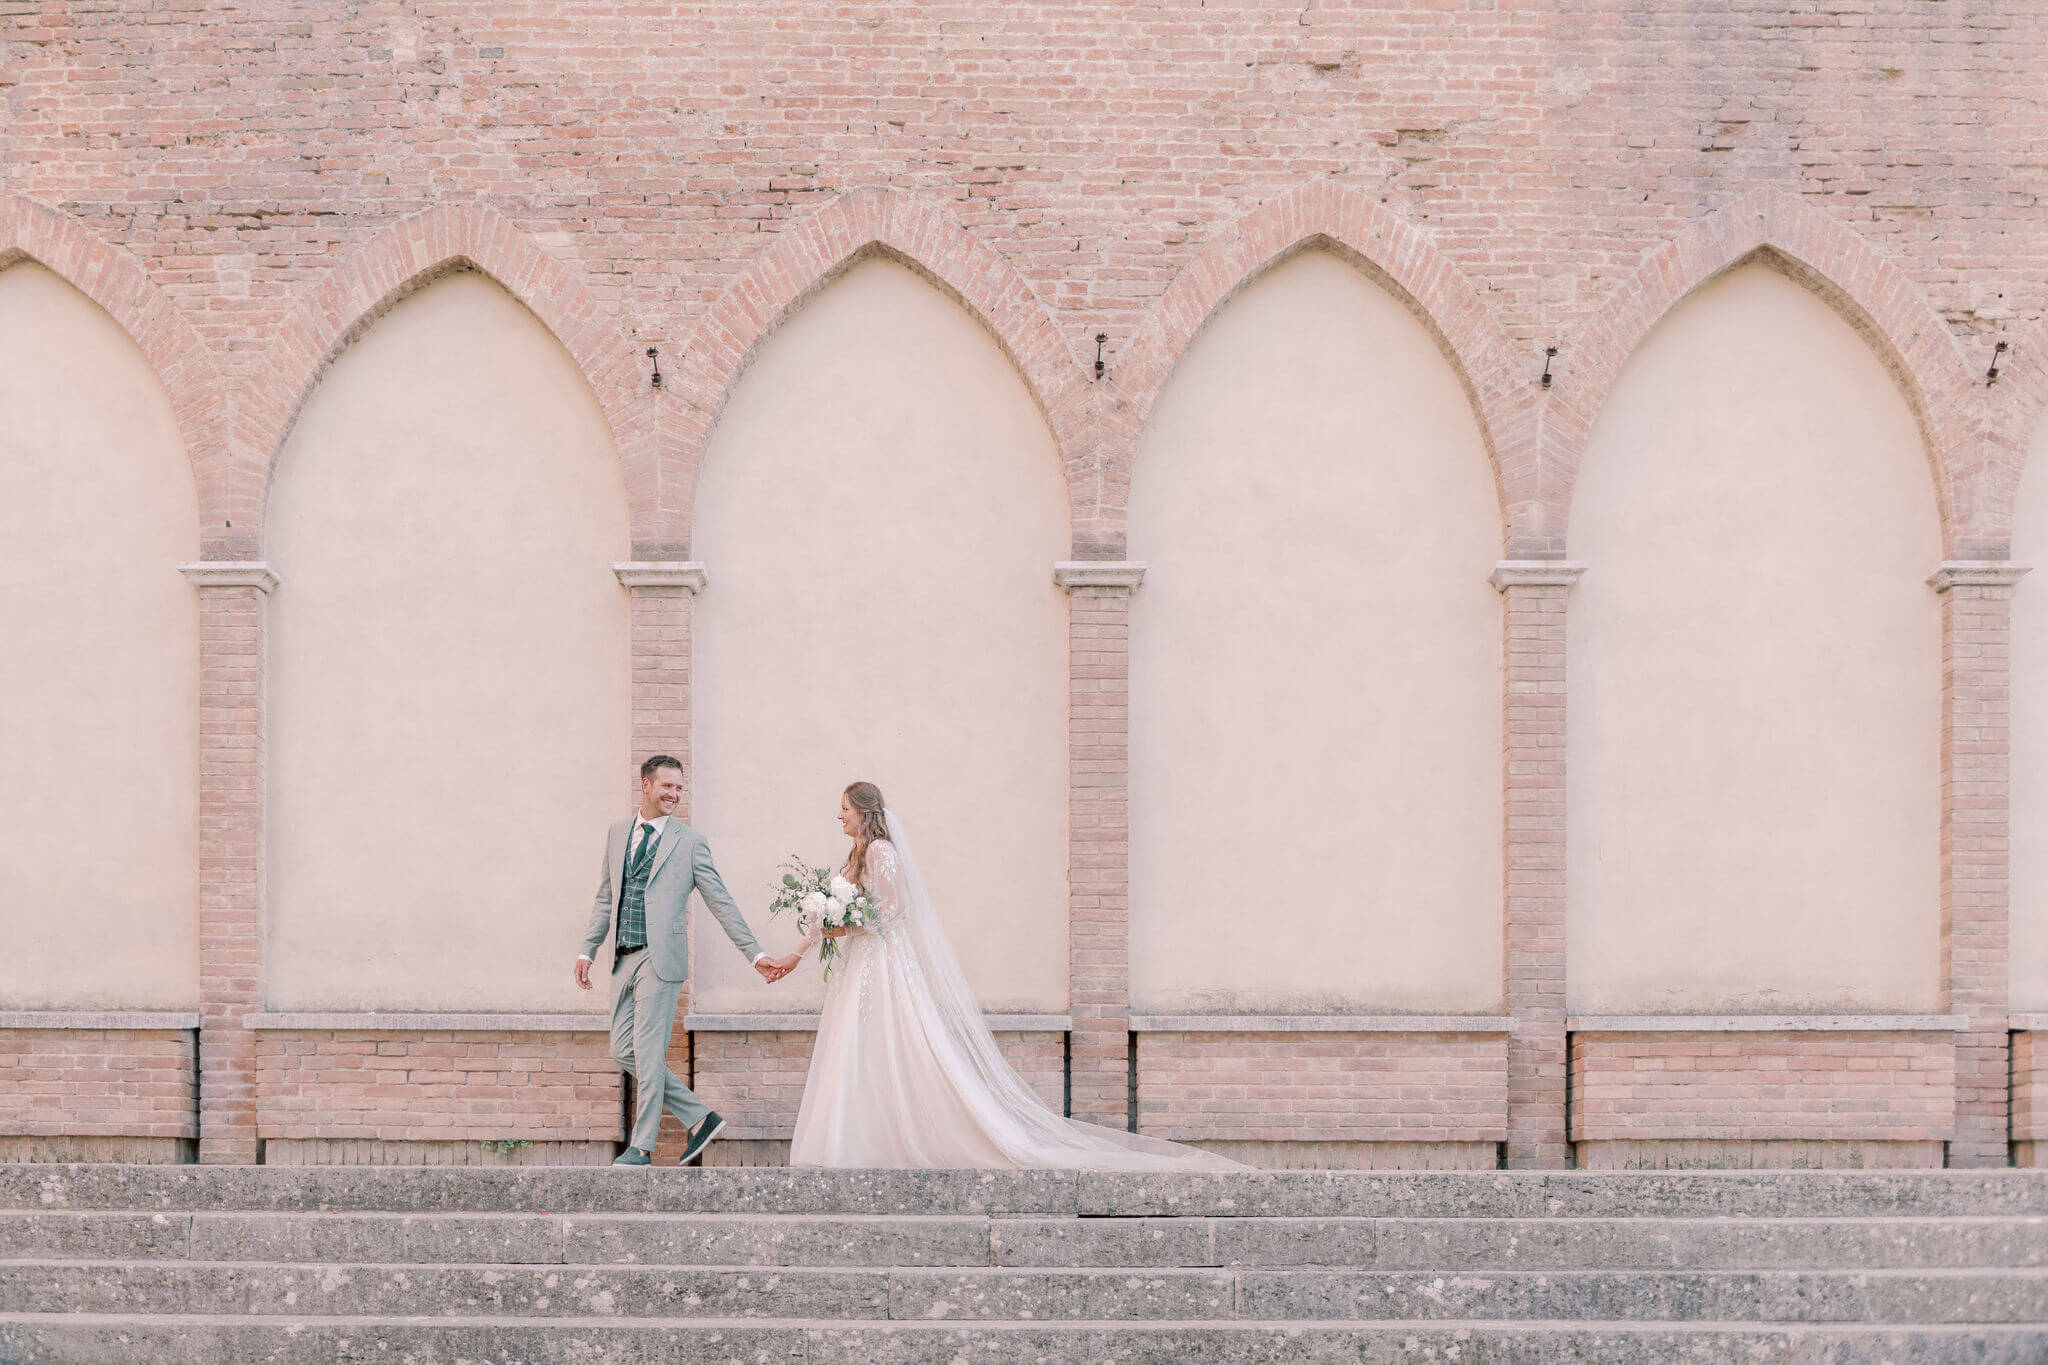 A bride and groom in front of a pink church as an illustration for a post about Dutch Wedding Traditions